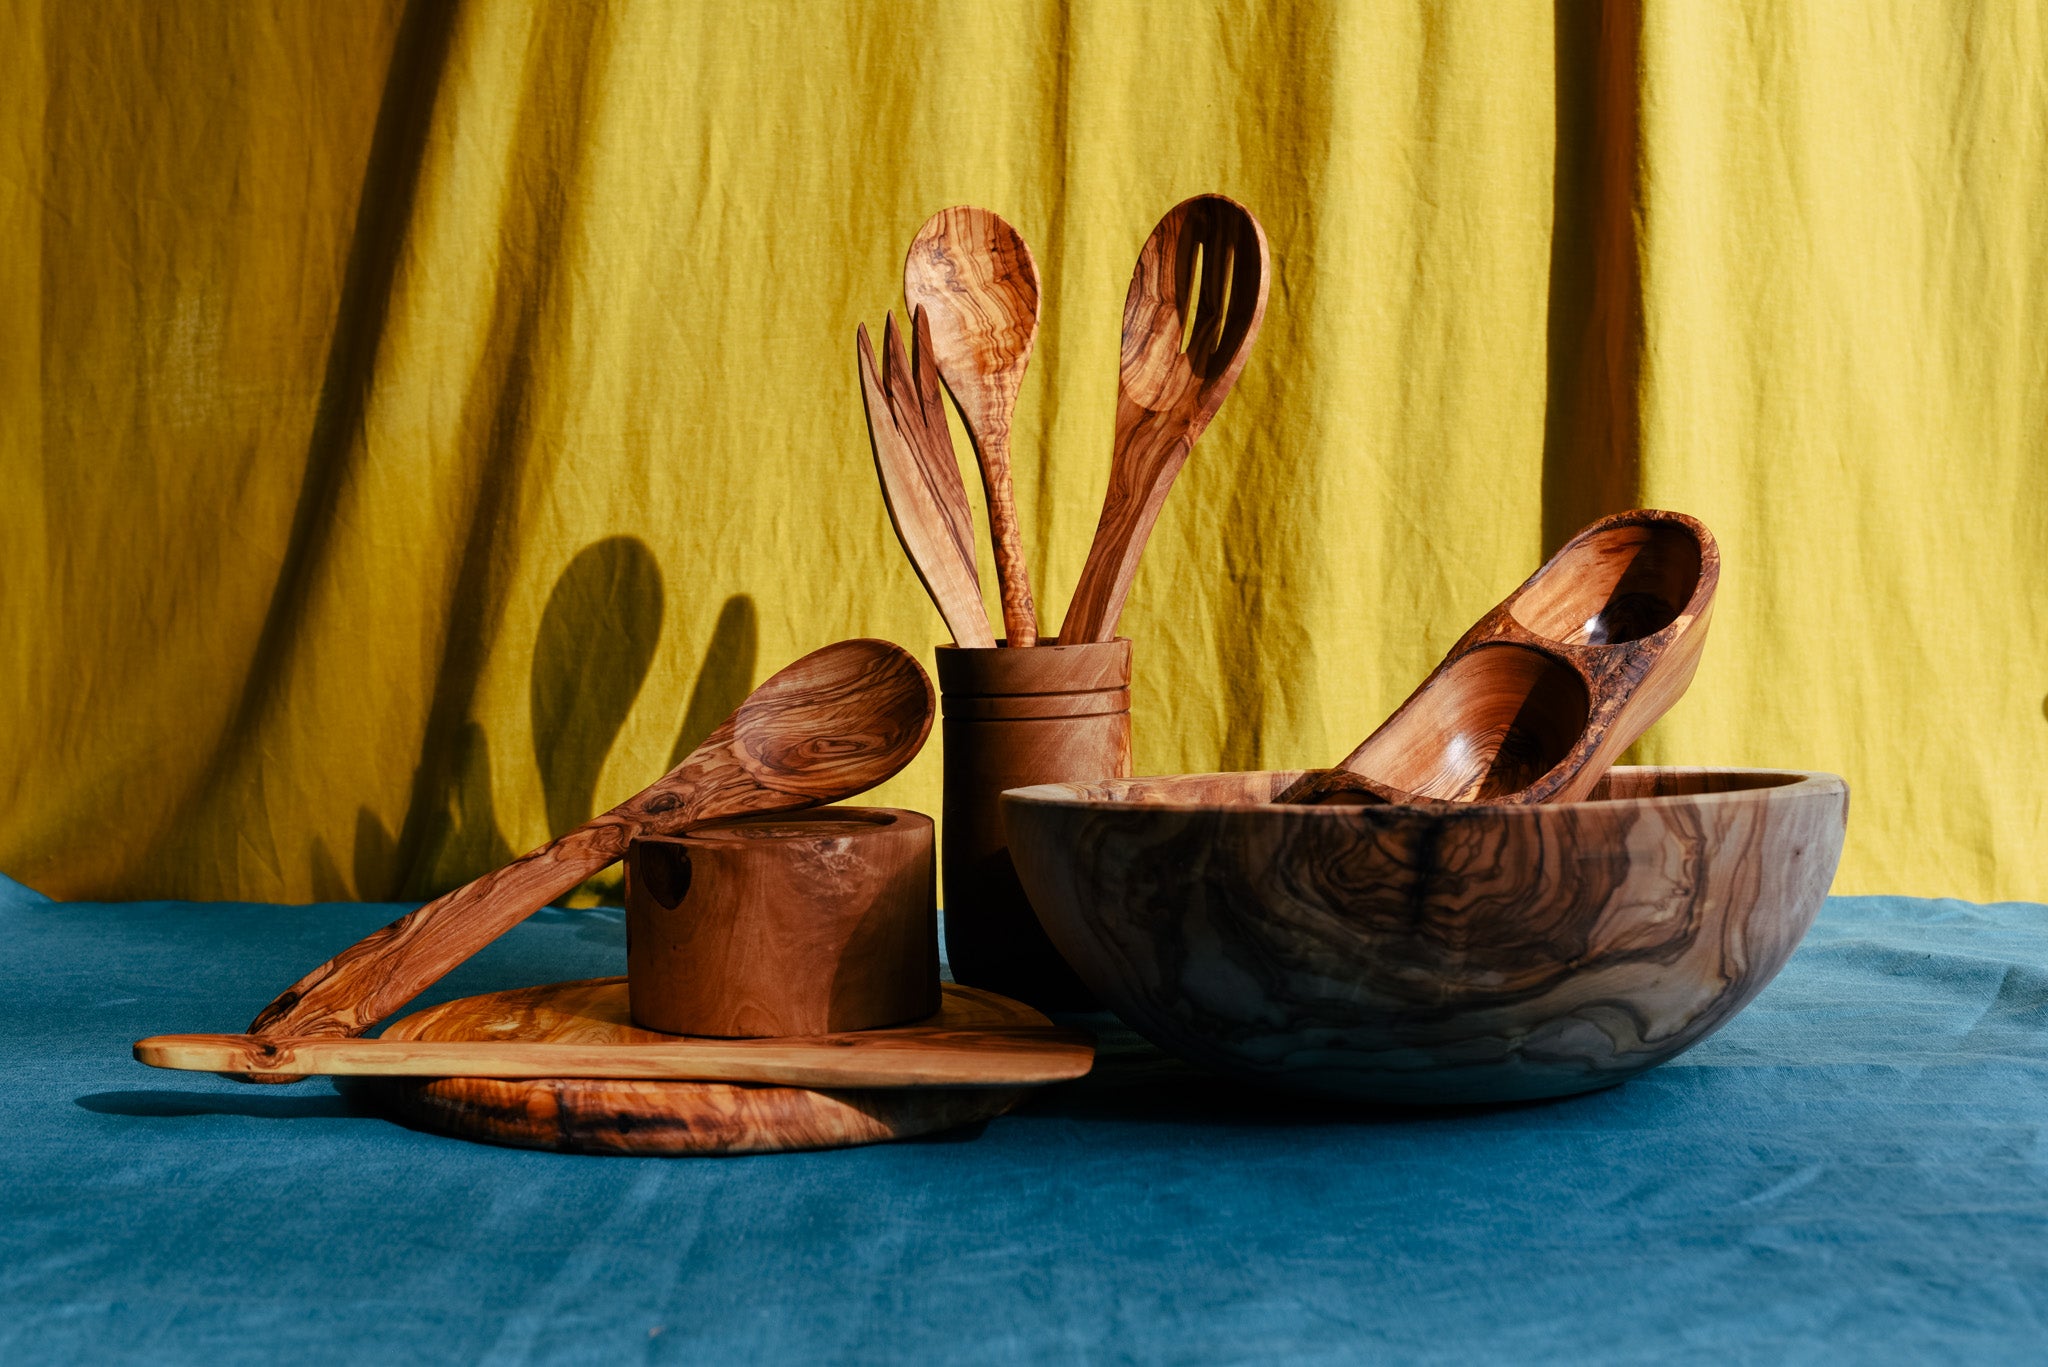 How To Take Care of Your Olive Wood Kitchenware